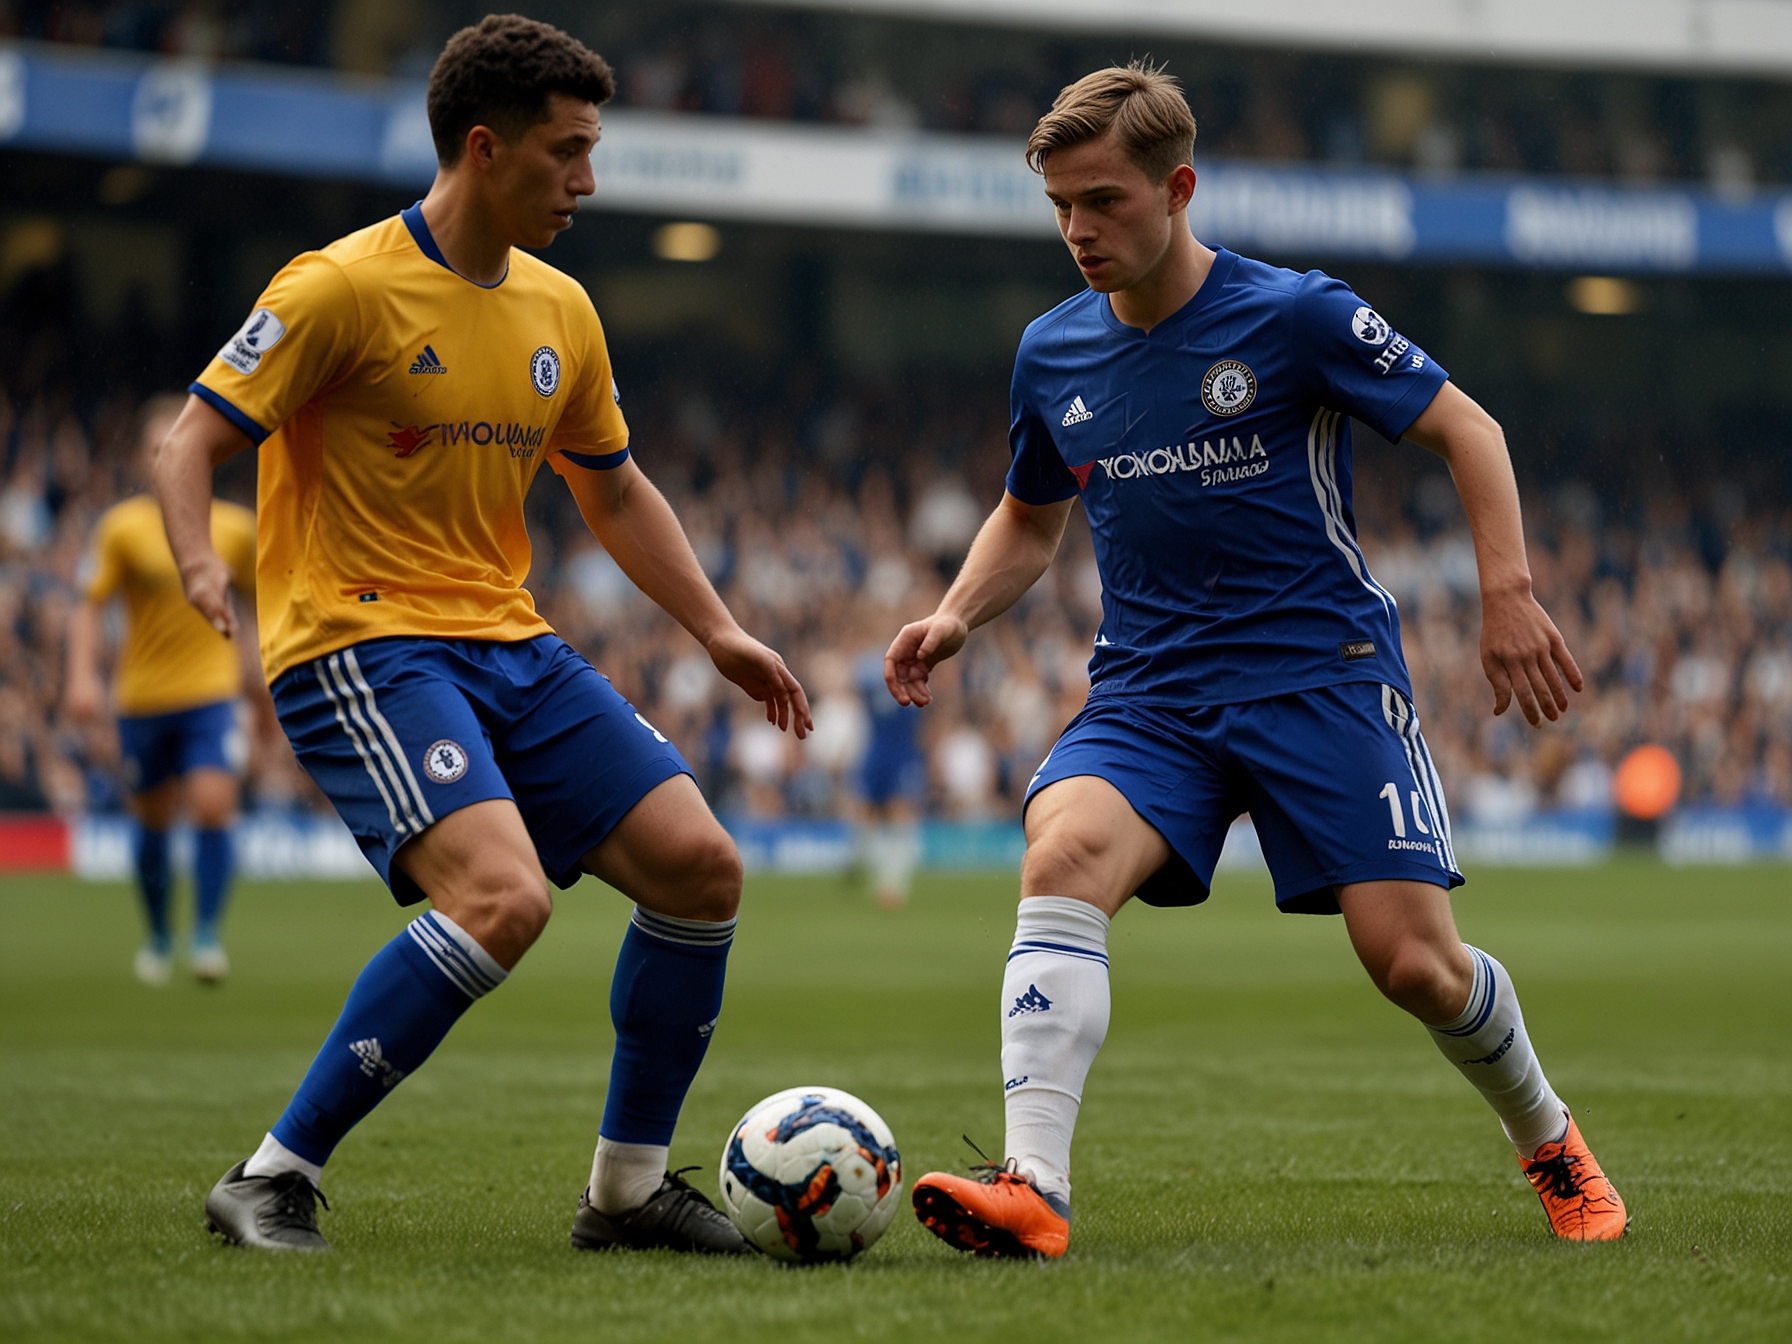 Alfie Gilchrist in action for Chelsea's youth team, displaying his defensive skills and commanding presence, which has garnered interest from clubs in England's Championship and Italy's Serie A.